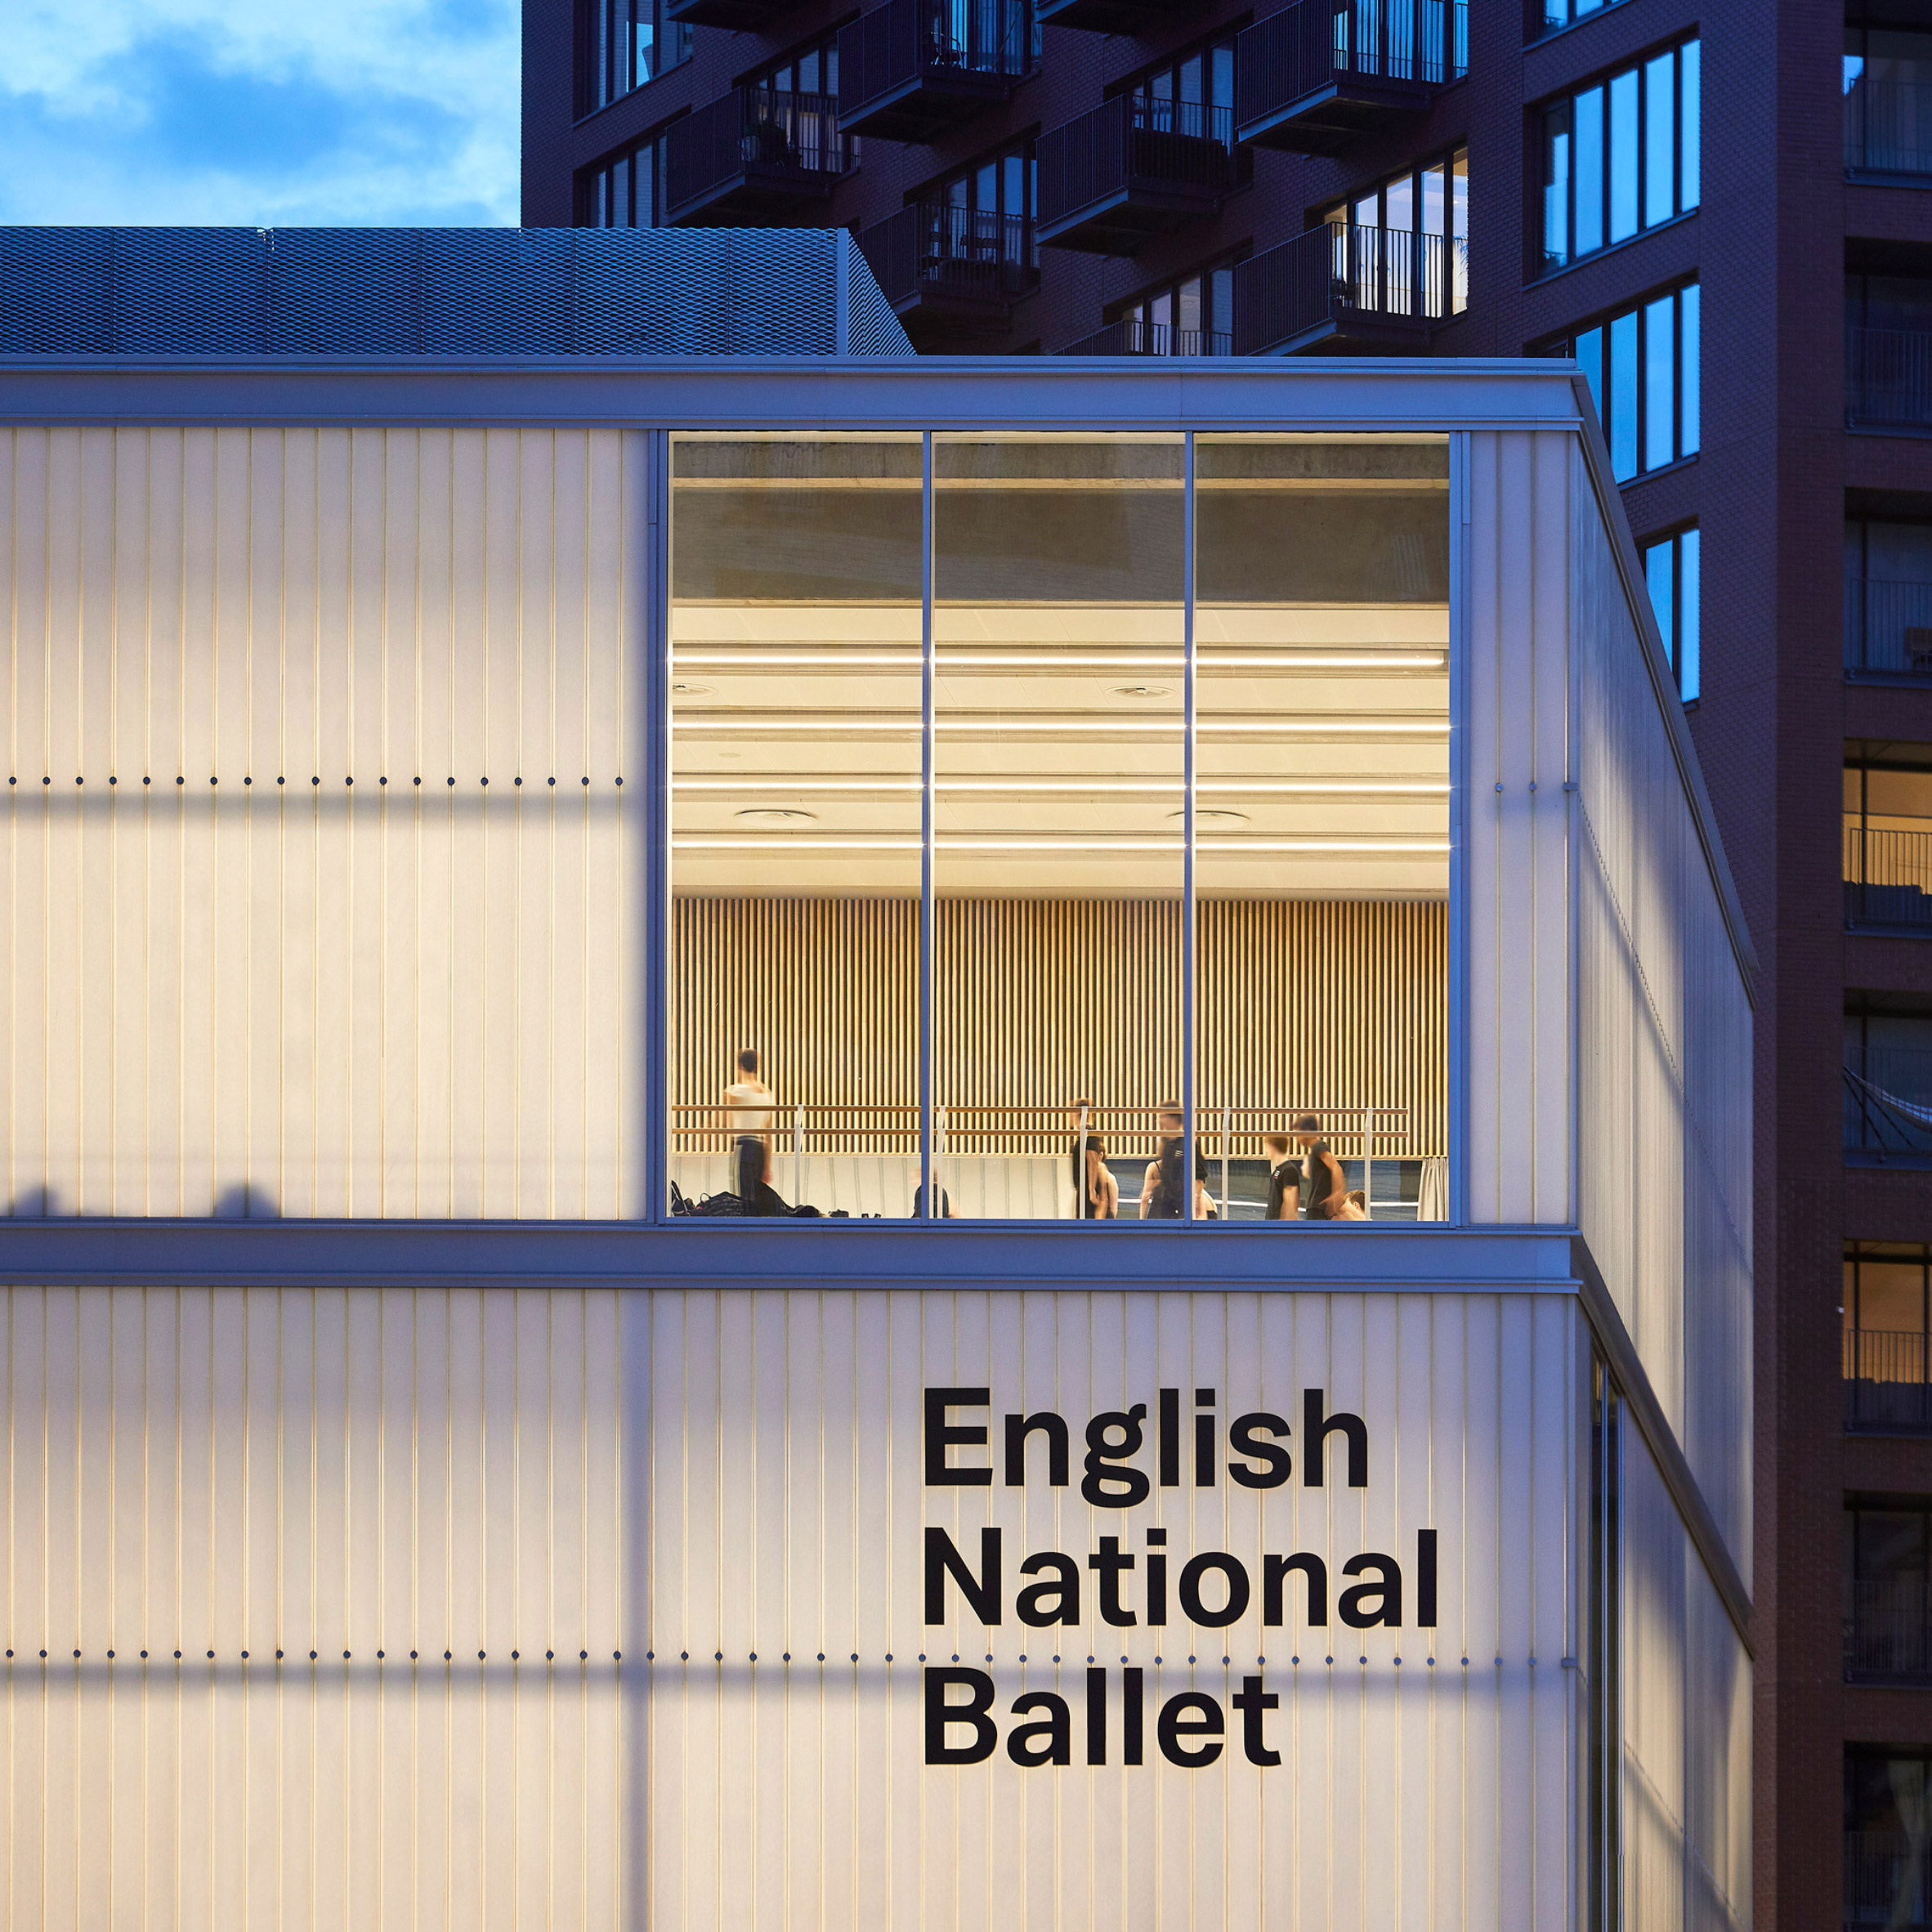 Top 10 British architecture projects of 2020: English National Ballet by Glenn Howells